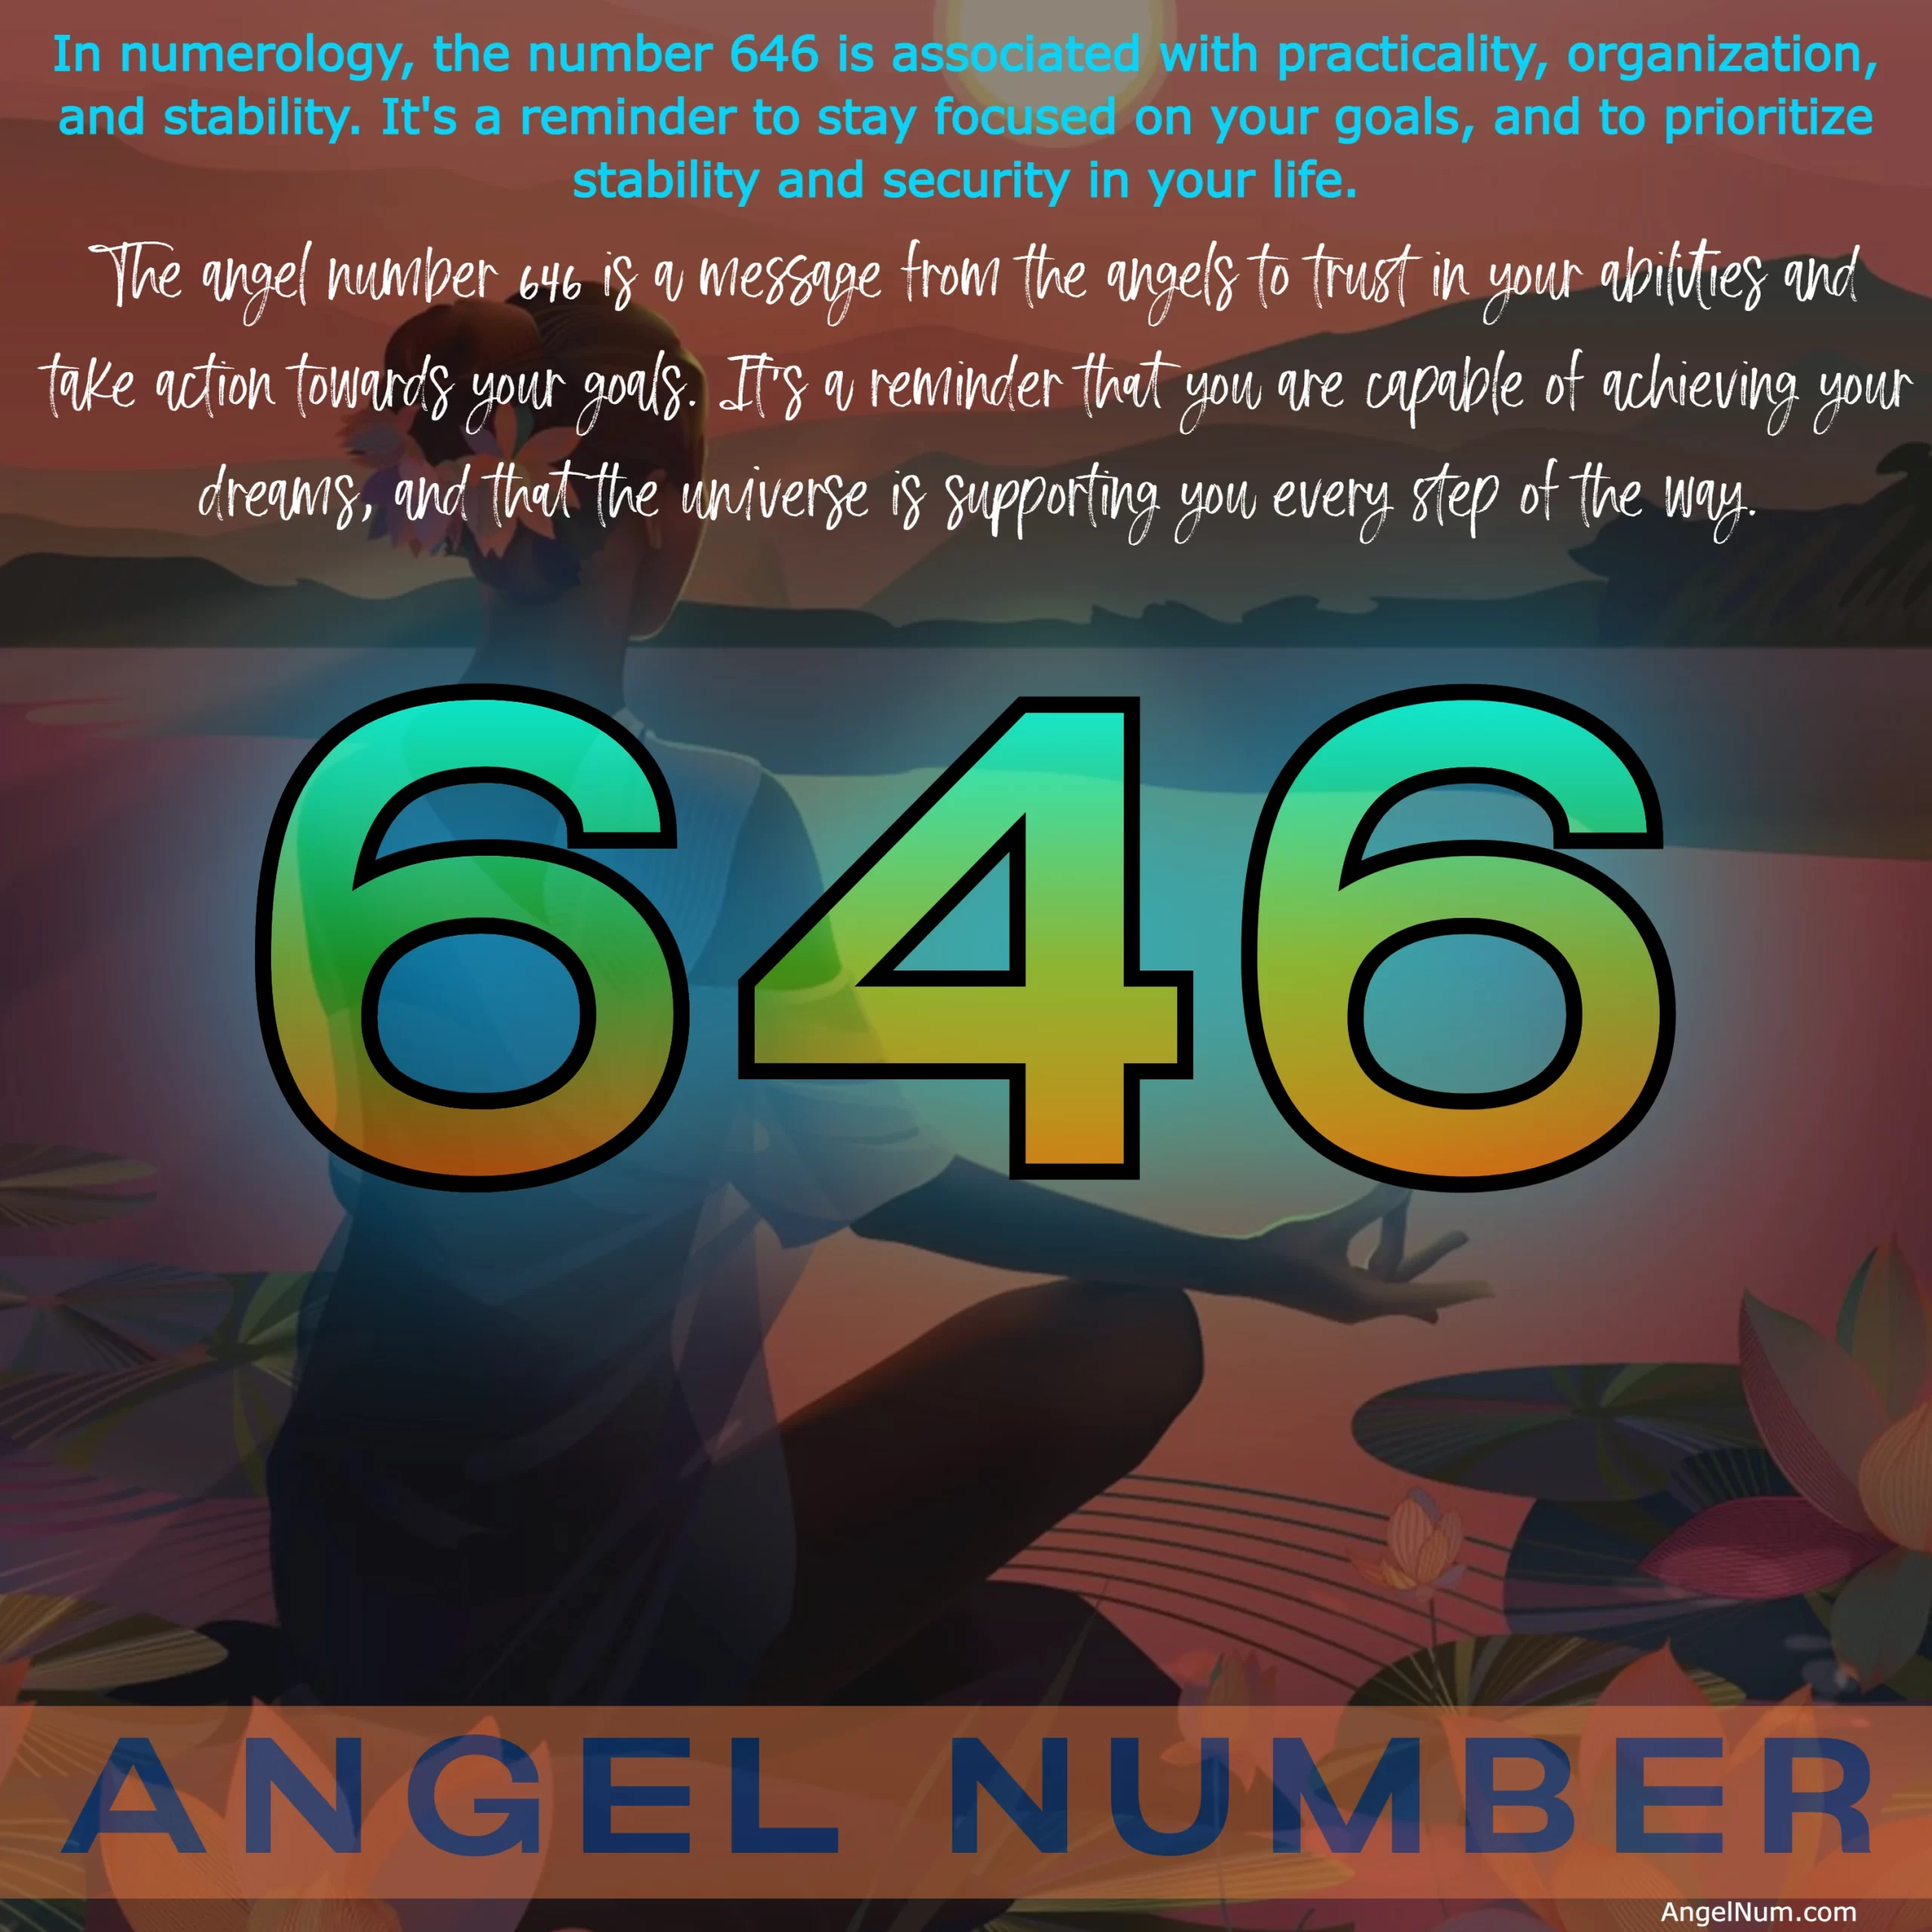 Angel Number 646: Meaning, Numerology, and Spiritual Guide